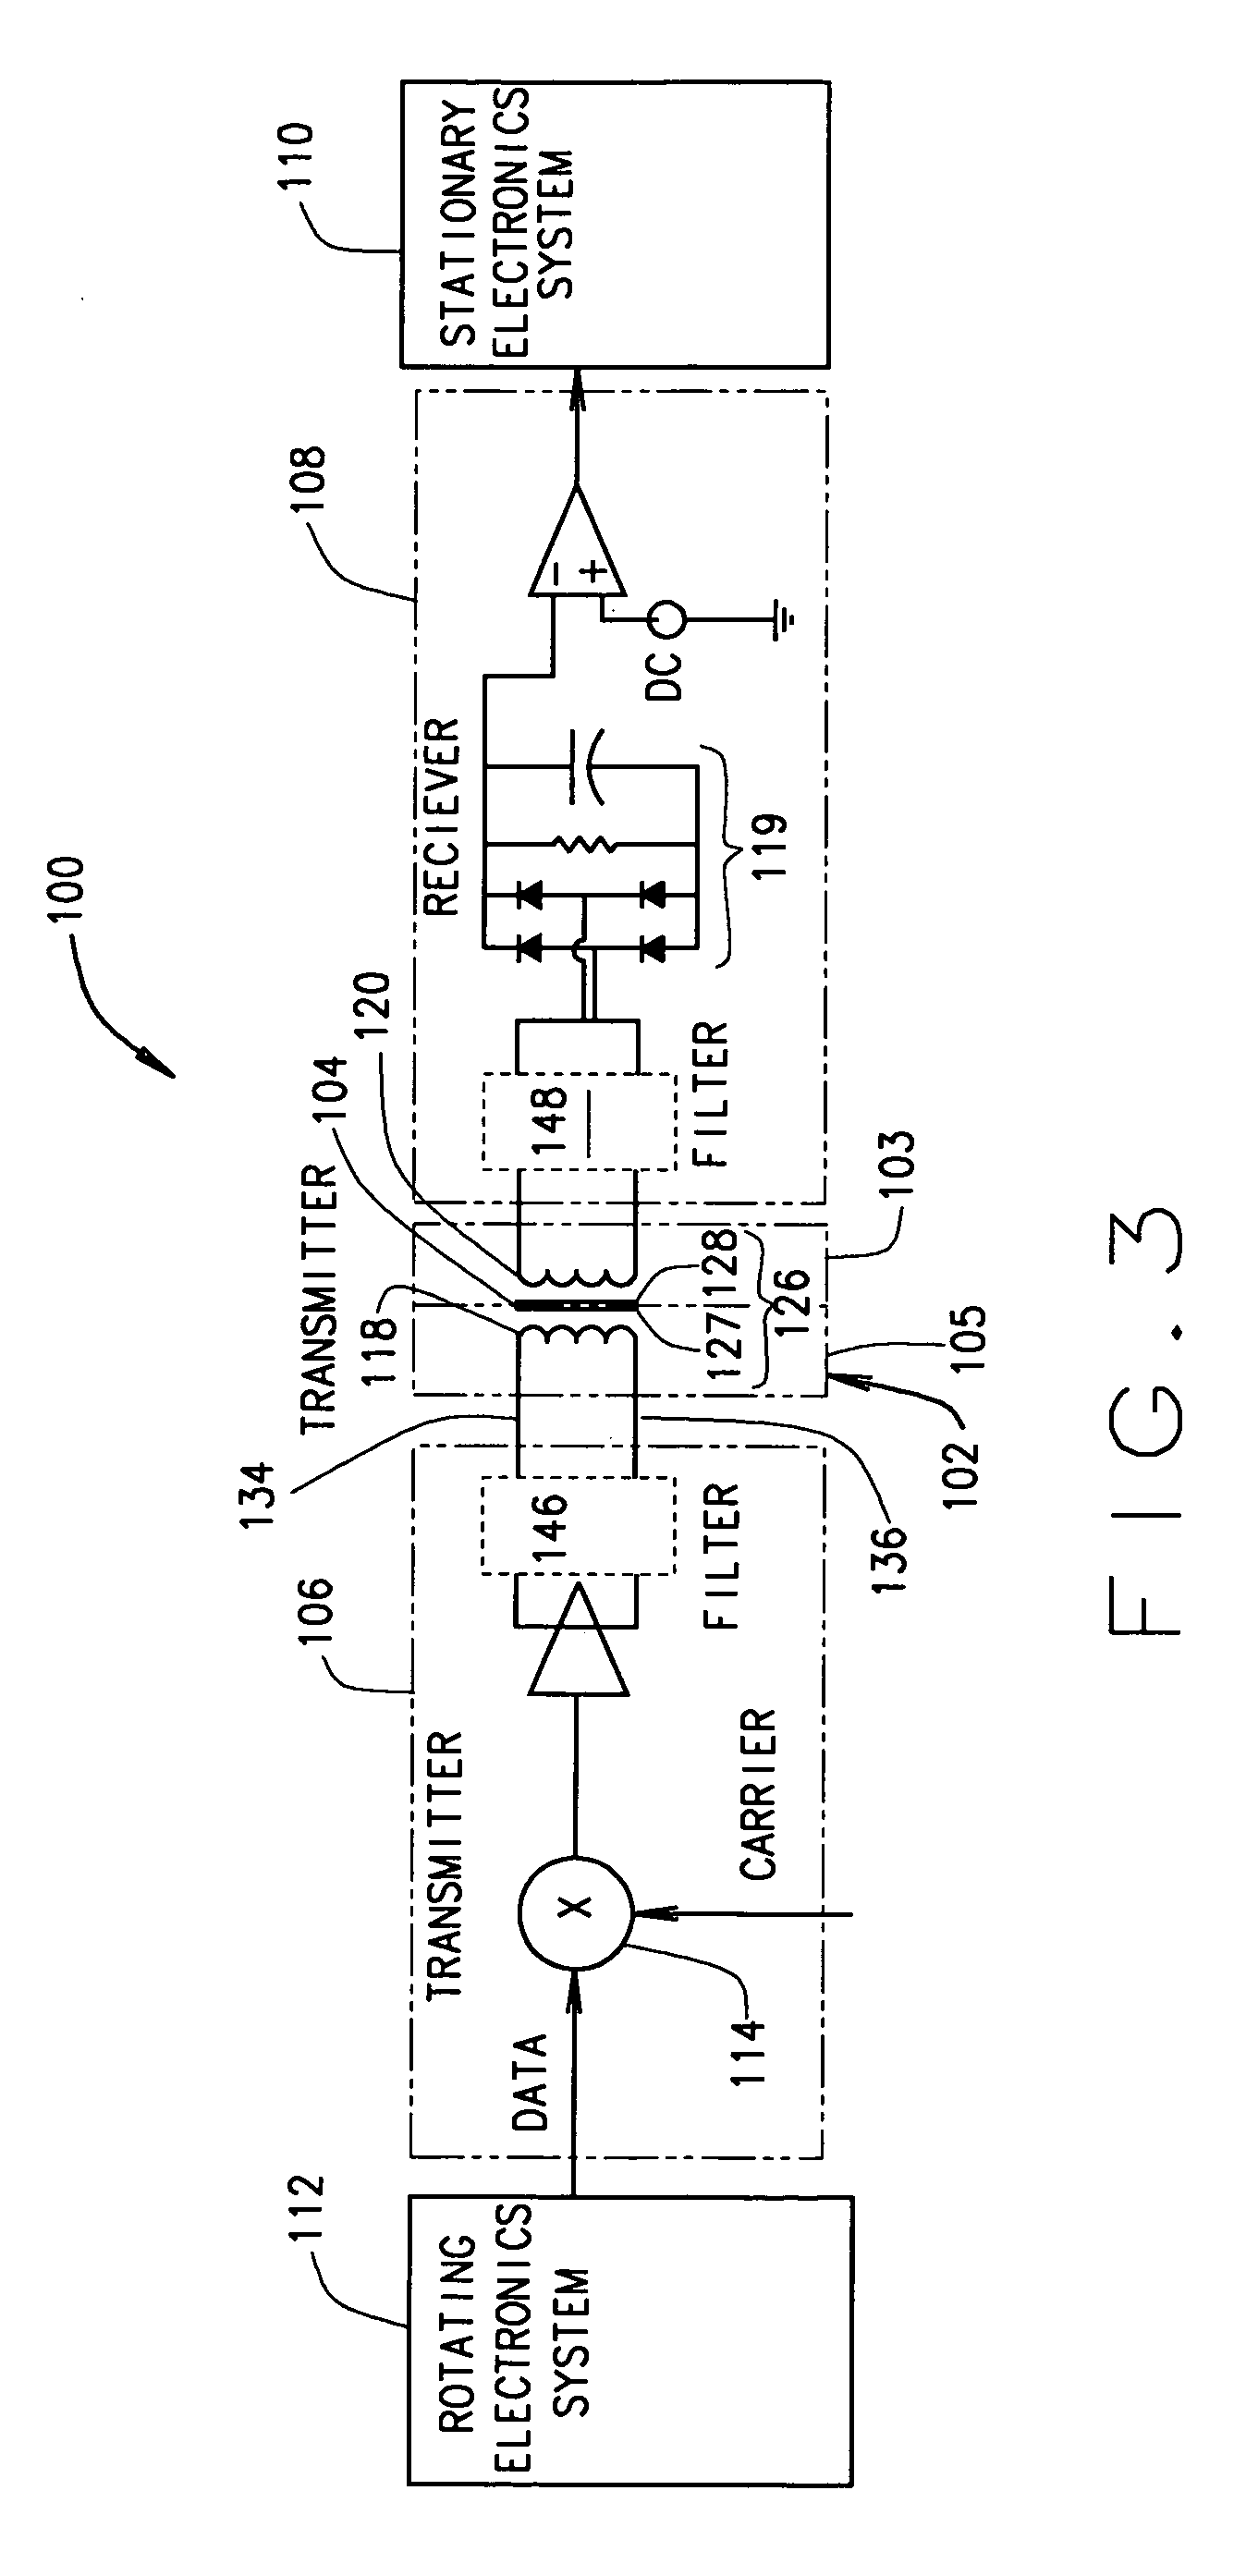 Methods and apparatus for communicating signals between portions of an apparatus in relative movement to one another